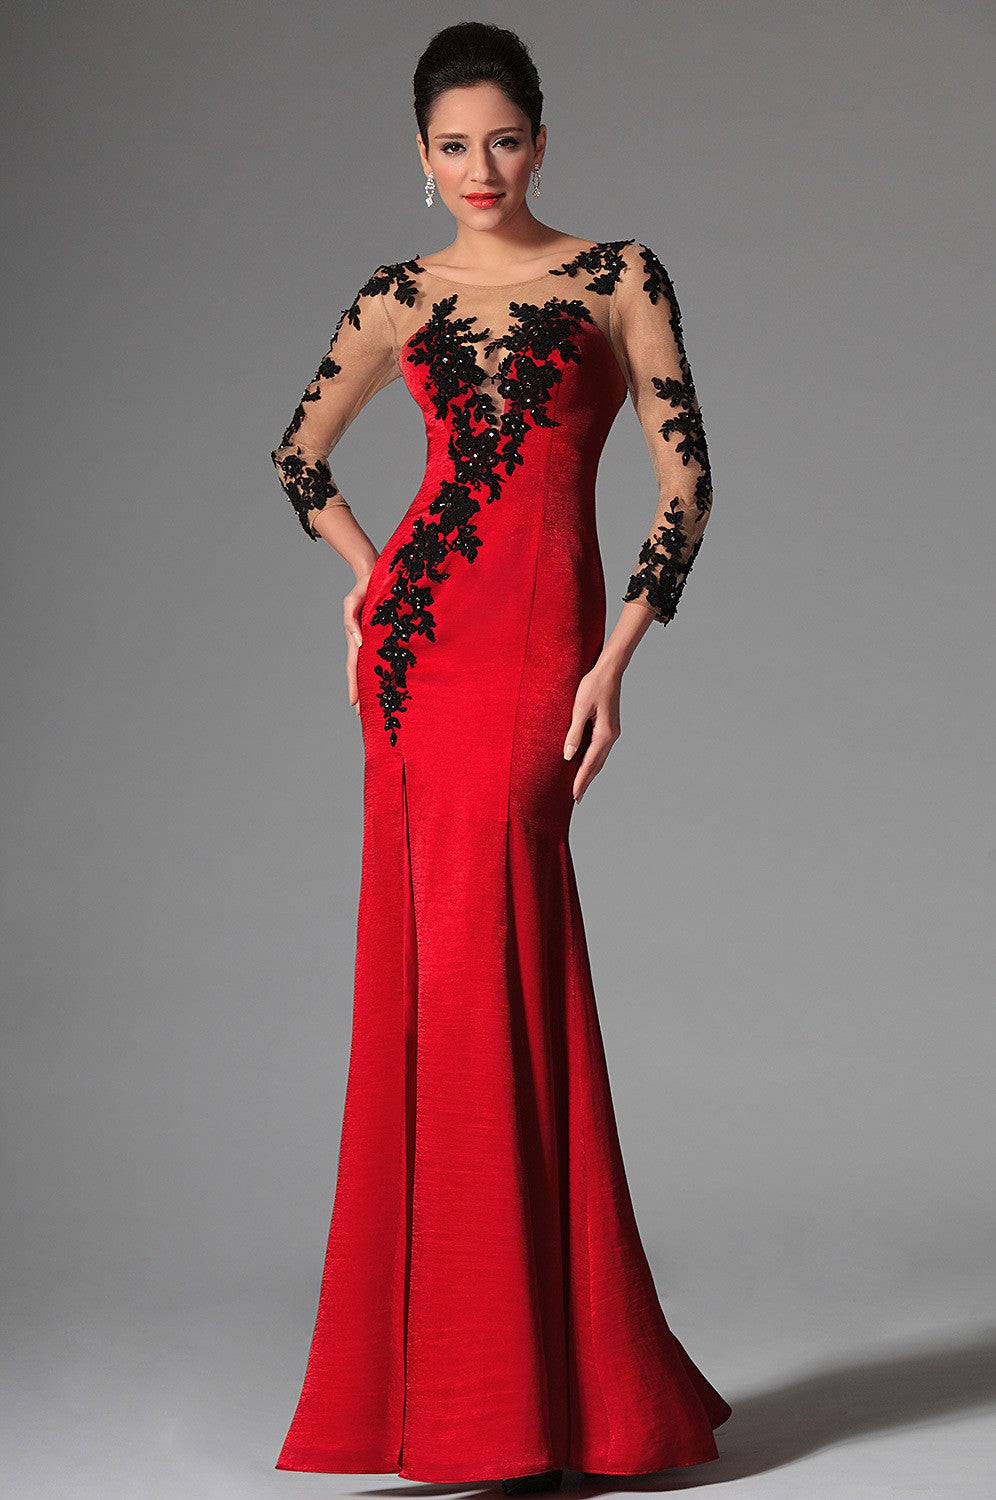 Red Black Lace Linen Trumpet/Mermaid 3/4 Length Sleeve Mother Bridesmaid Formal Dress(BDJT1357)